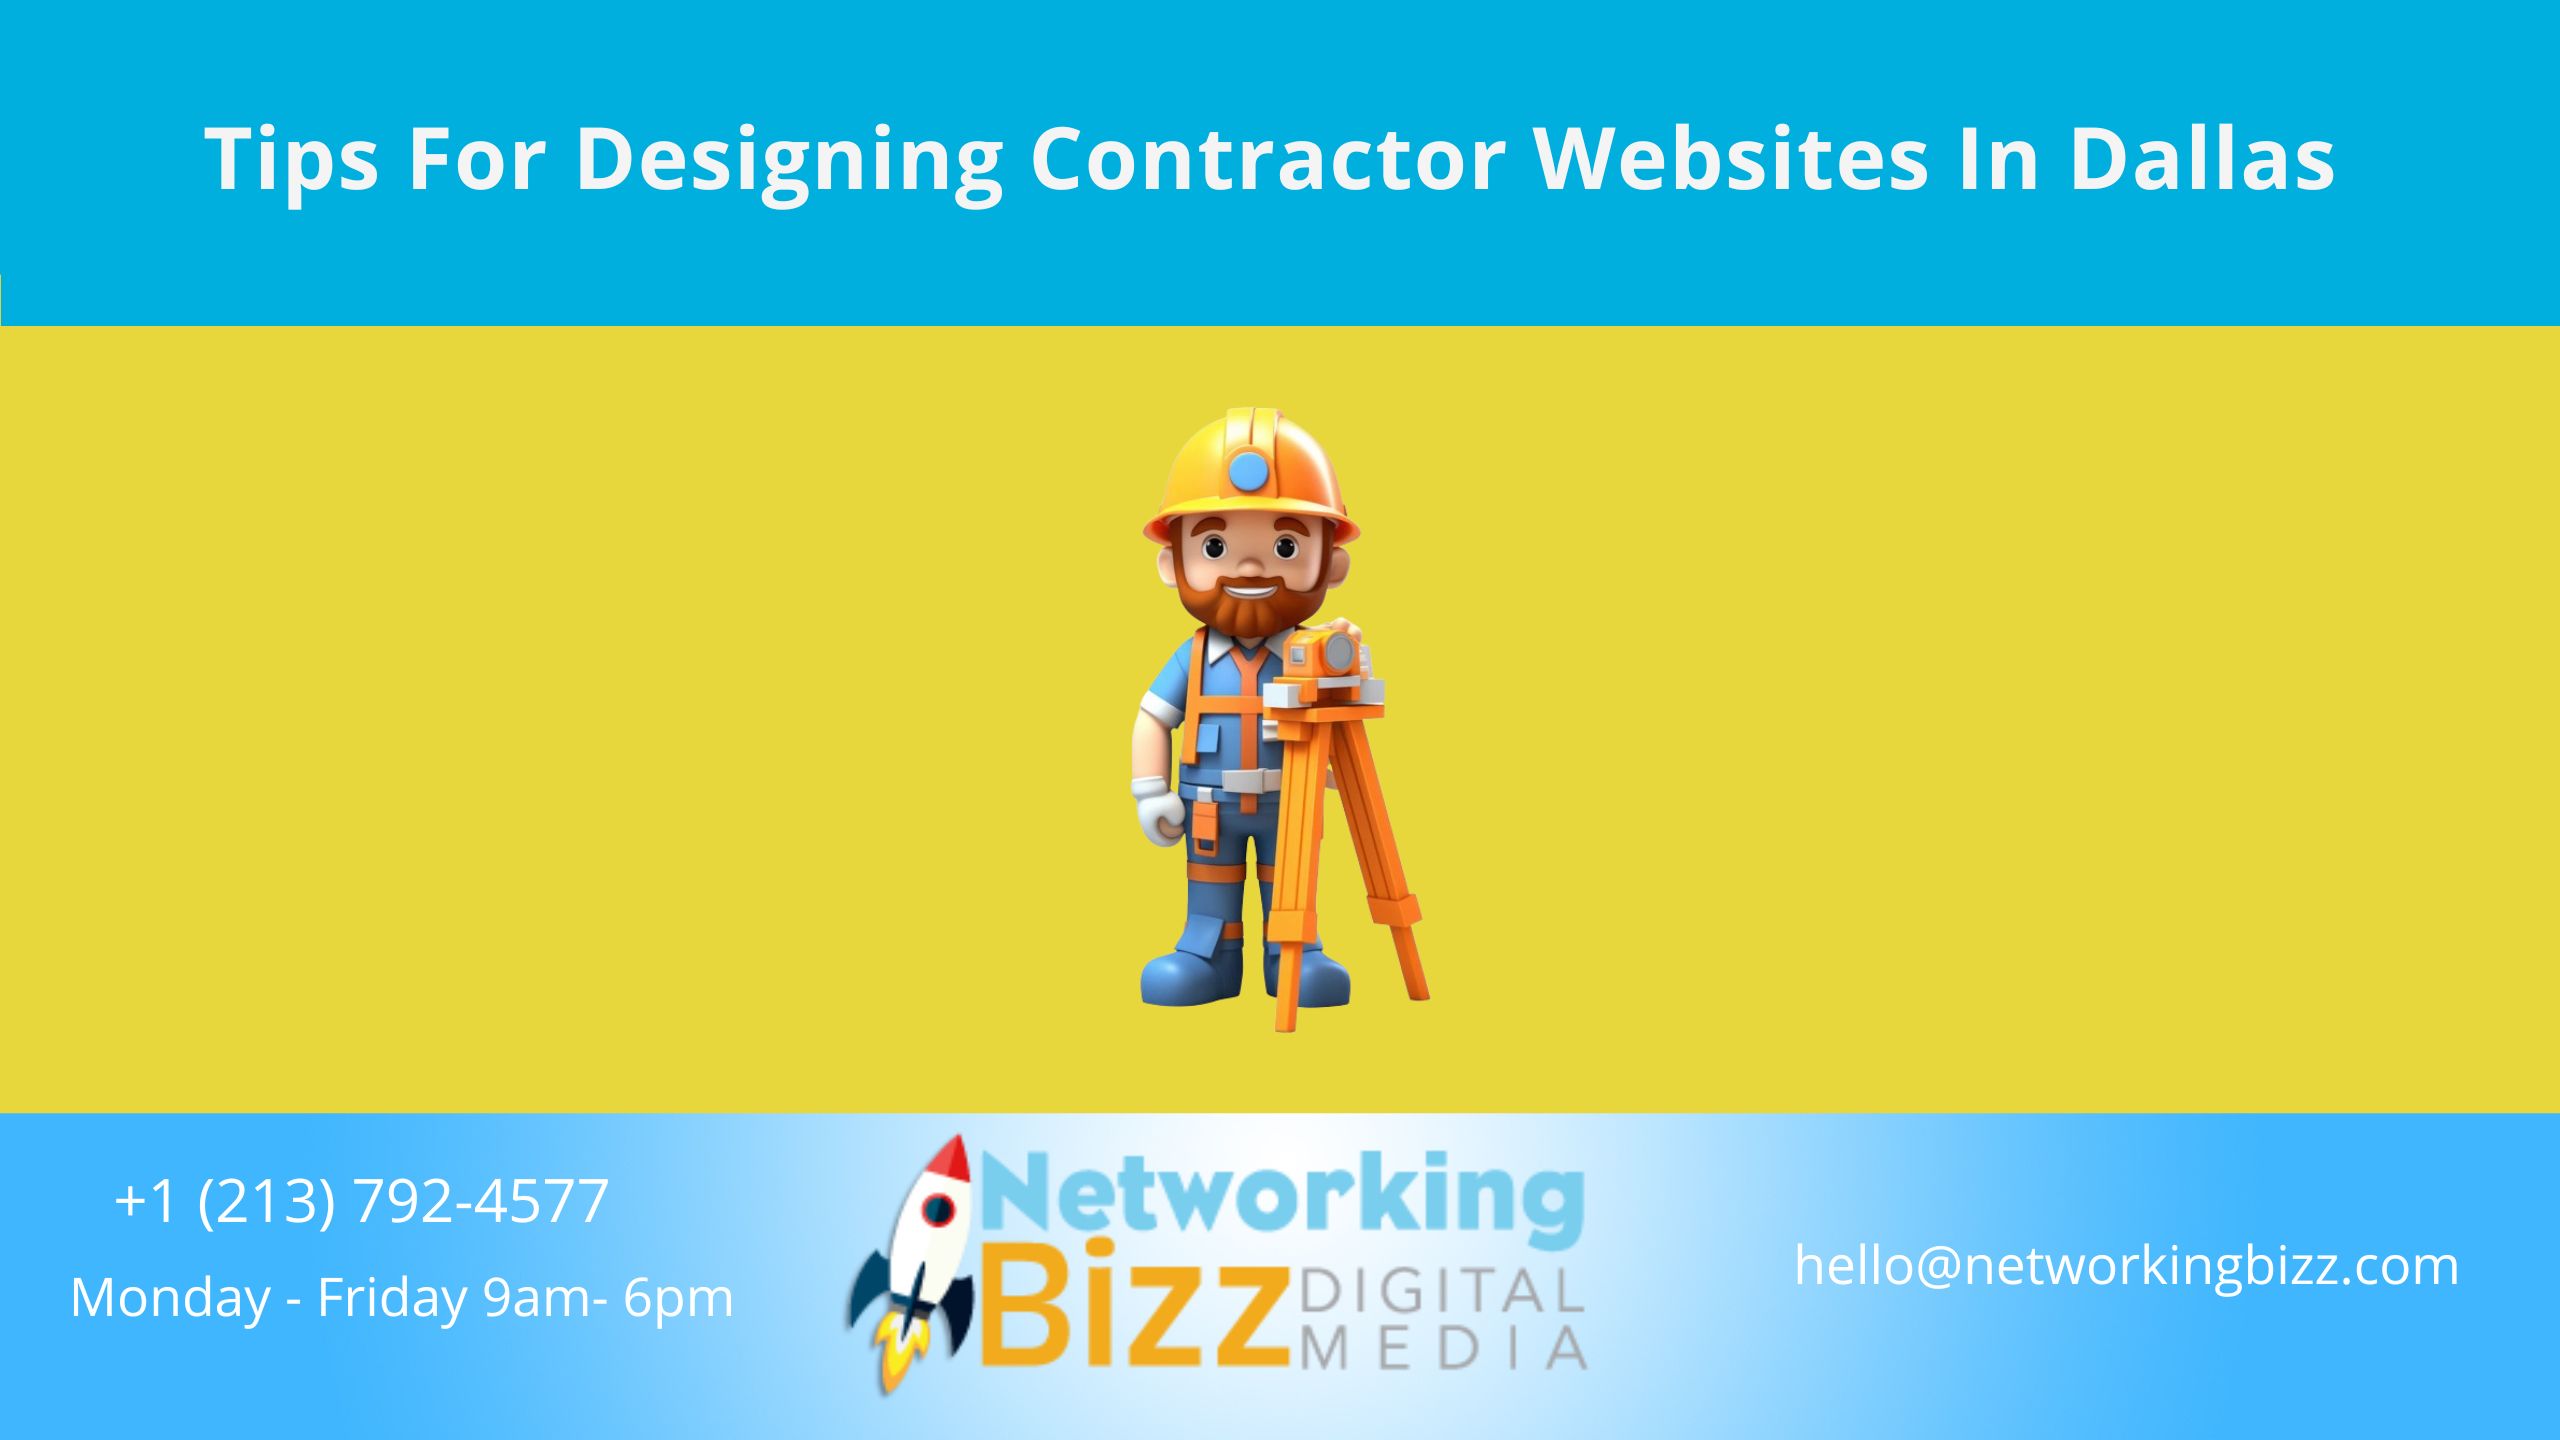 Tips For Designing Contractor Websites In Dallas